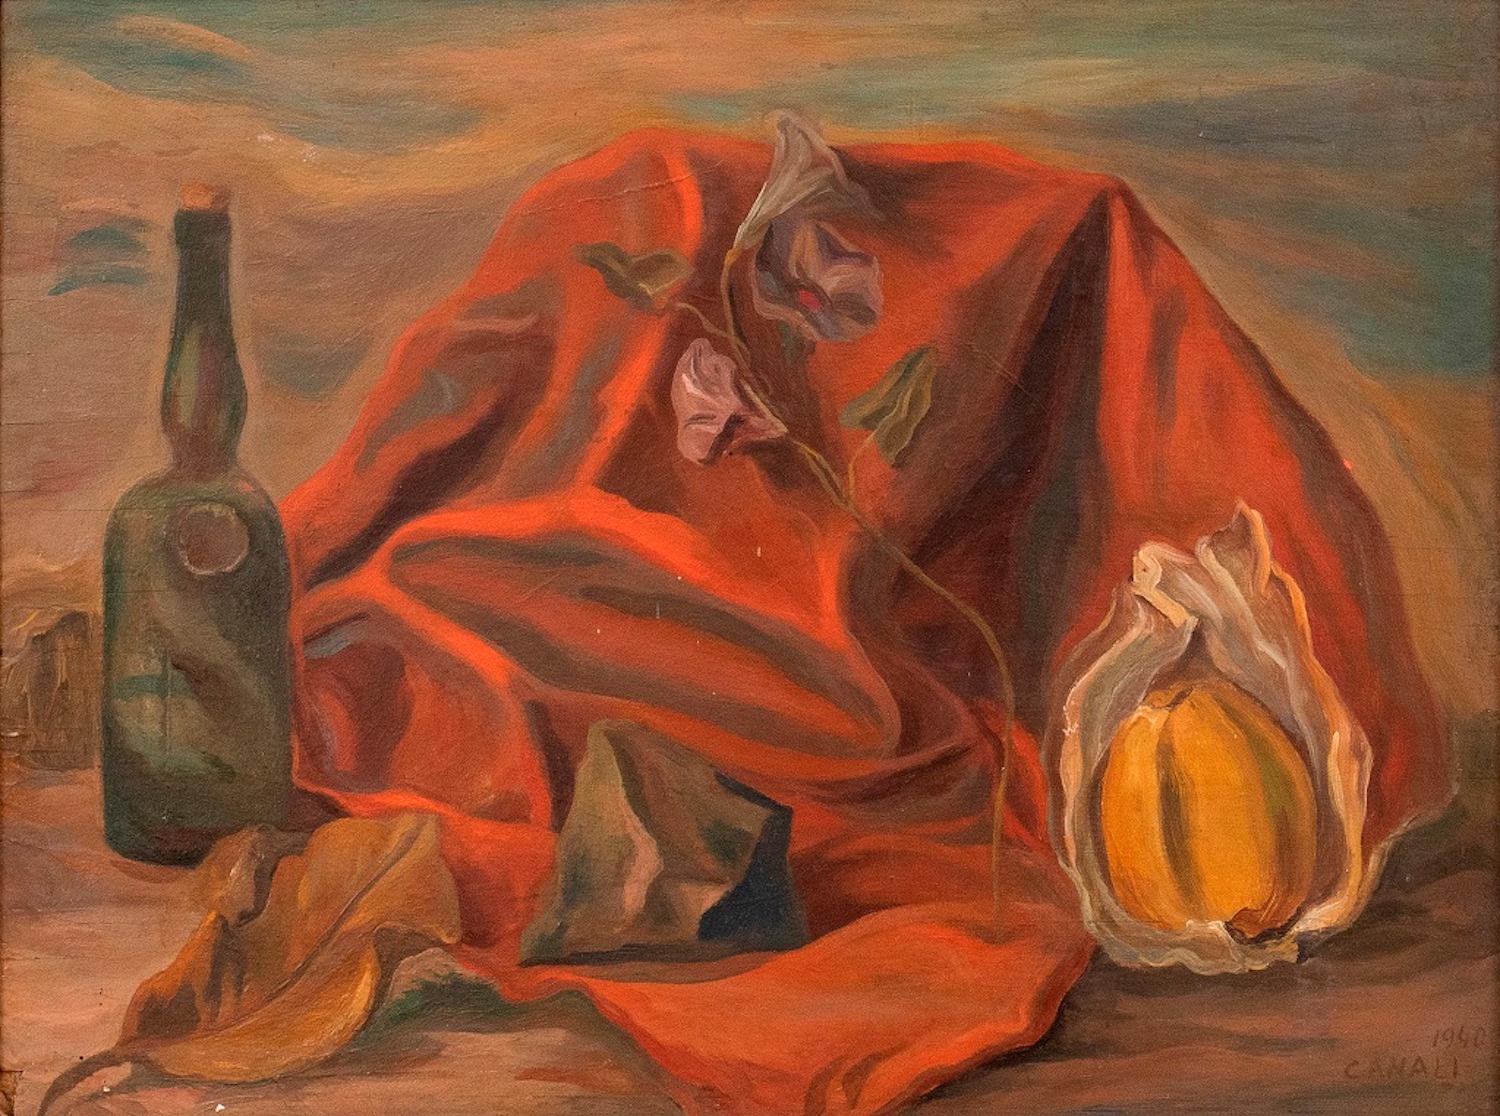 Giuseppe Canali  Figurative Painting - Still Life - Oil on Board by G. Canali - 1940